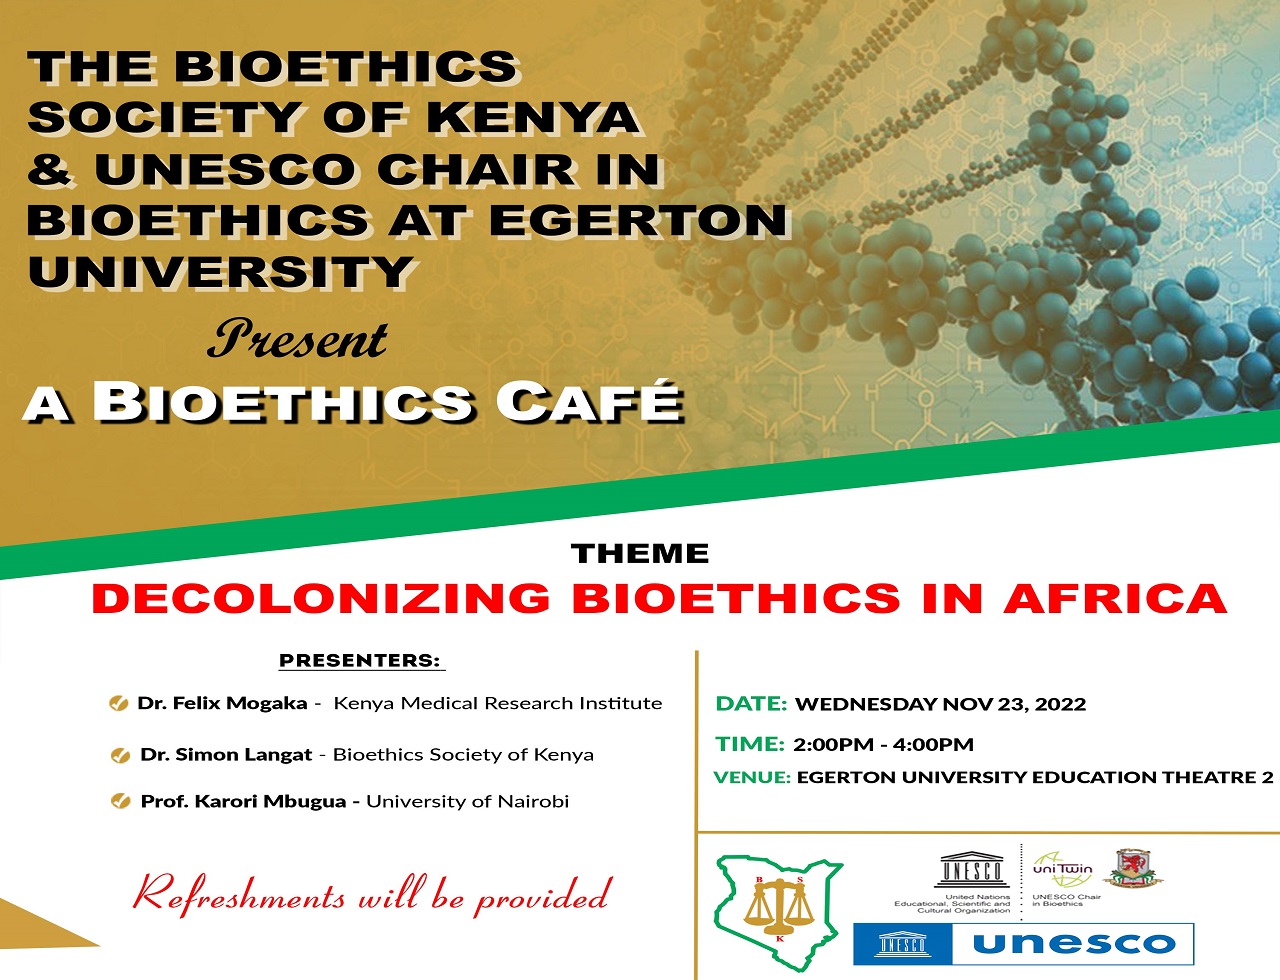  Bioethics Society of Kenya to conduct a bioethics cafe